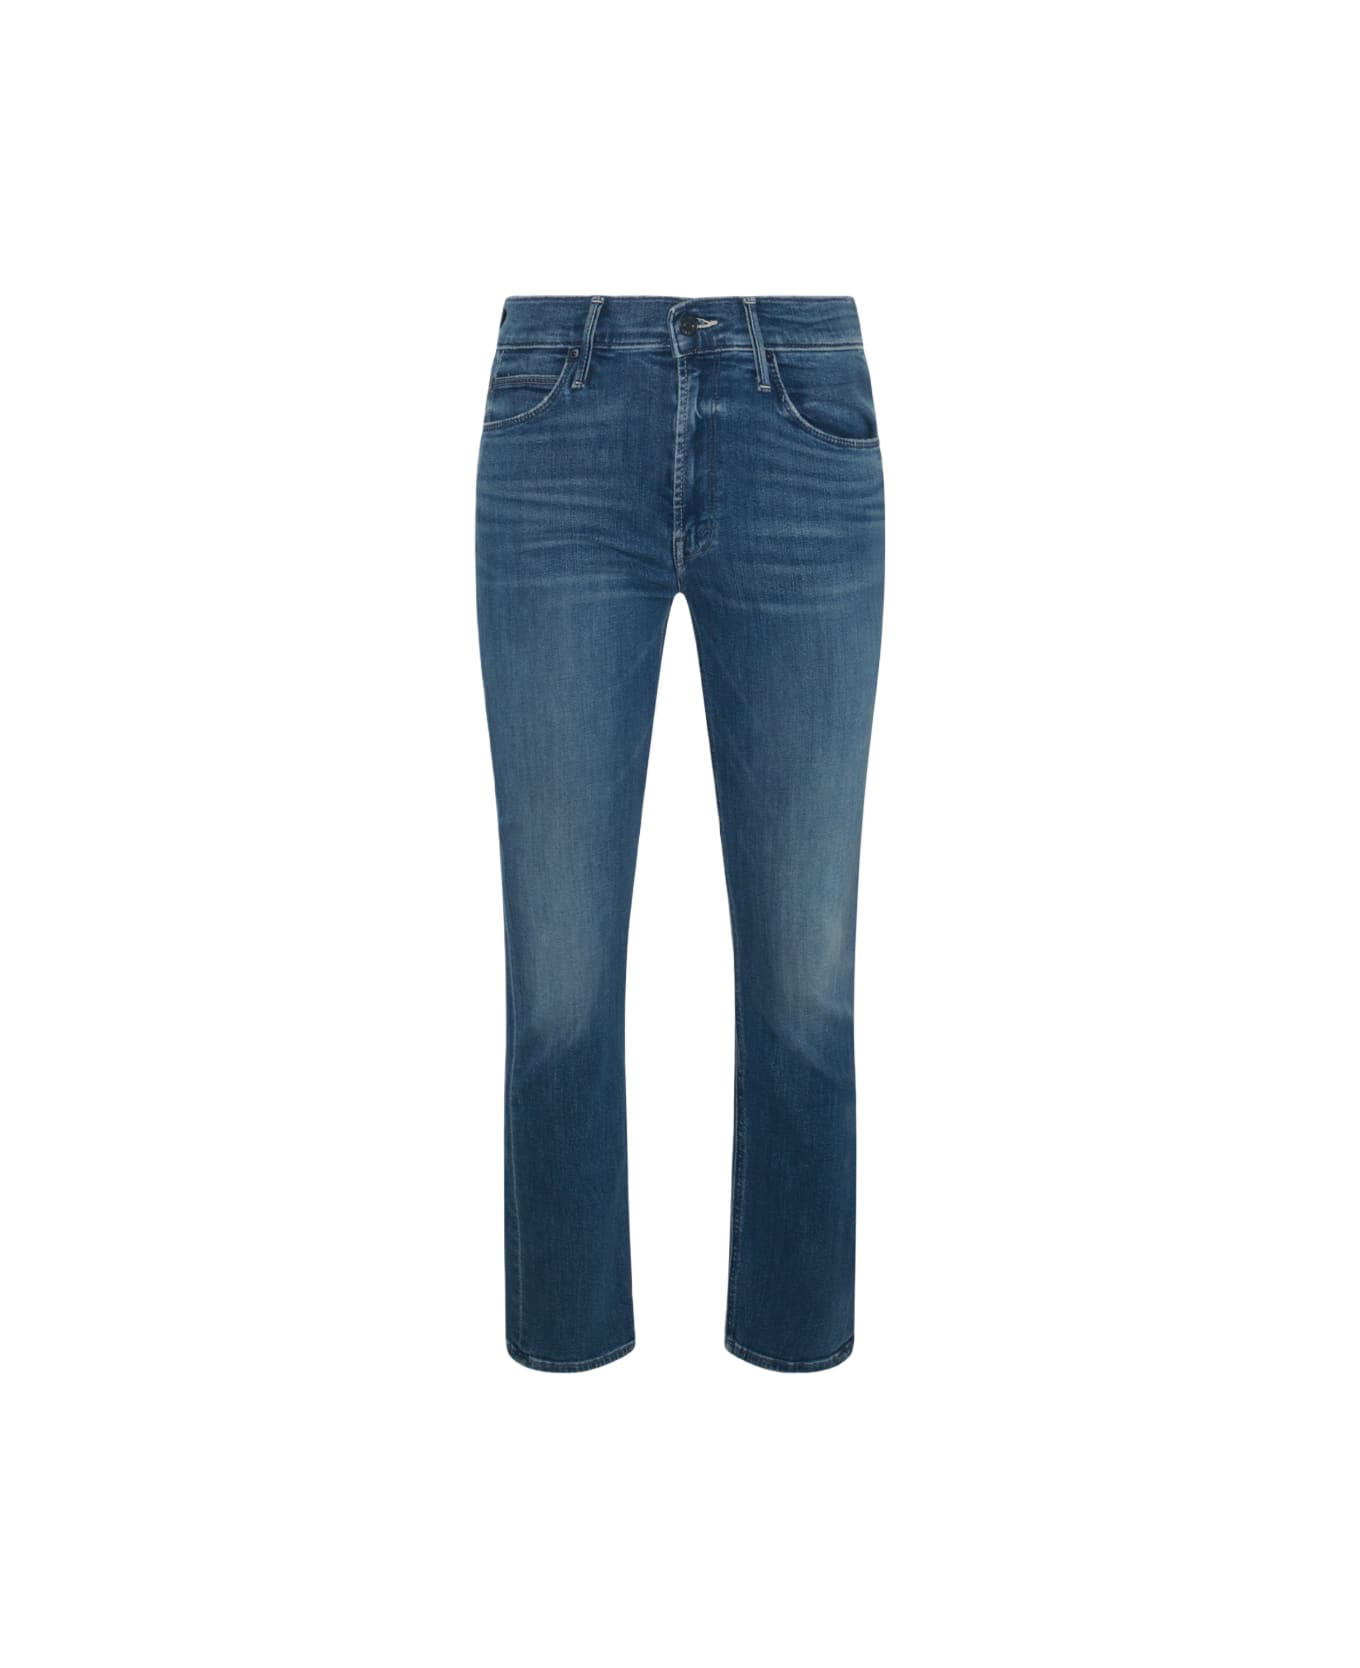 Mother Wish On A Star Denim Bootcut Jeans - WISH ON A STAR